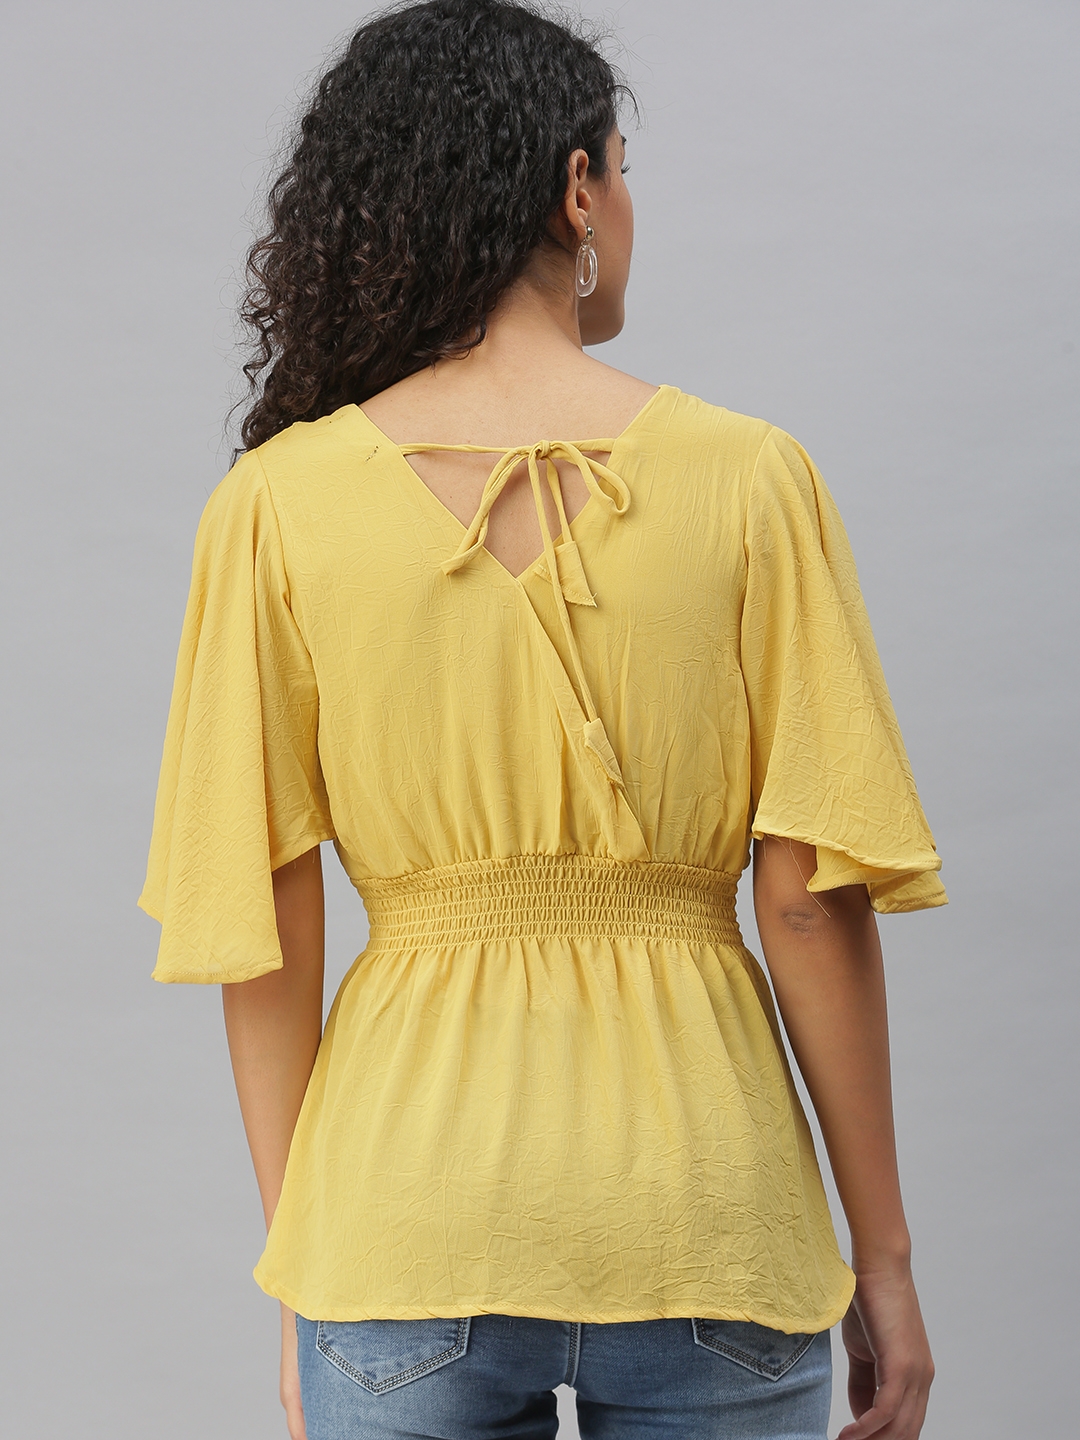 Women's Yellow Polyester Solid Tops